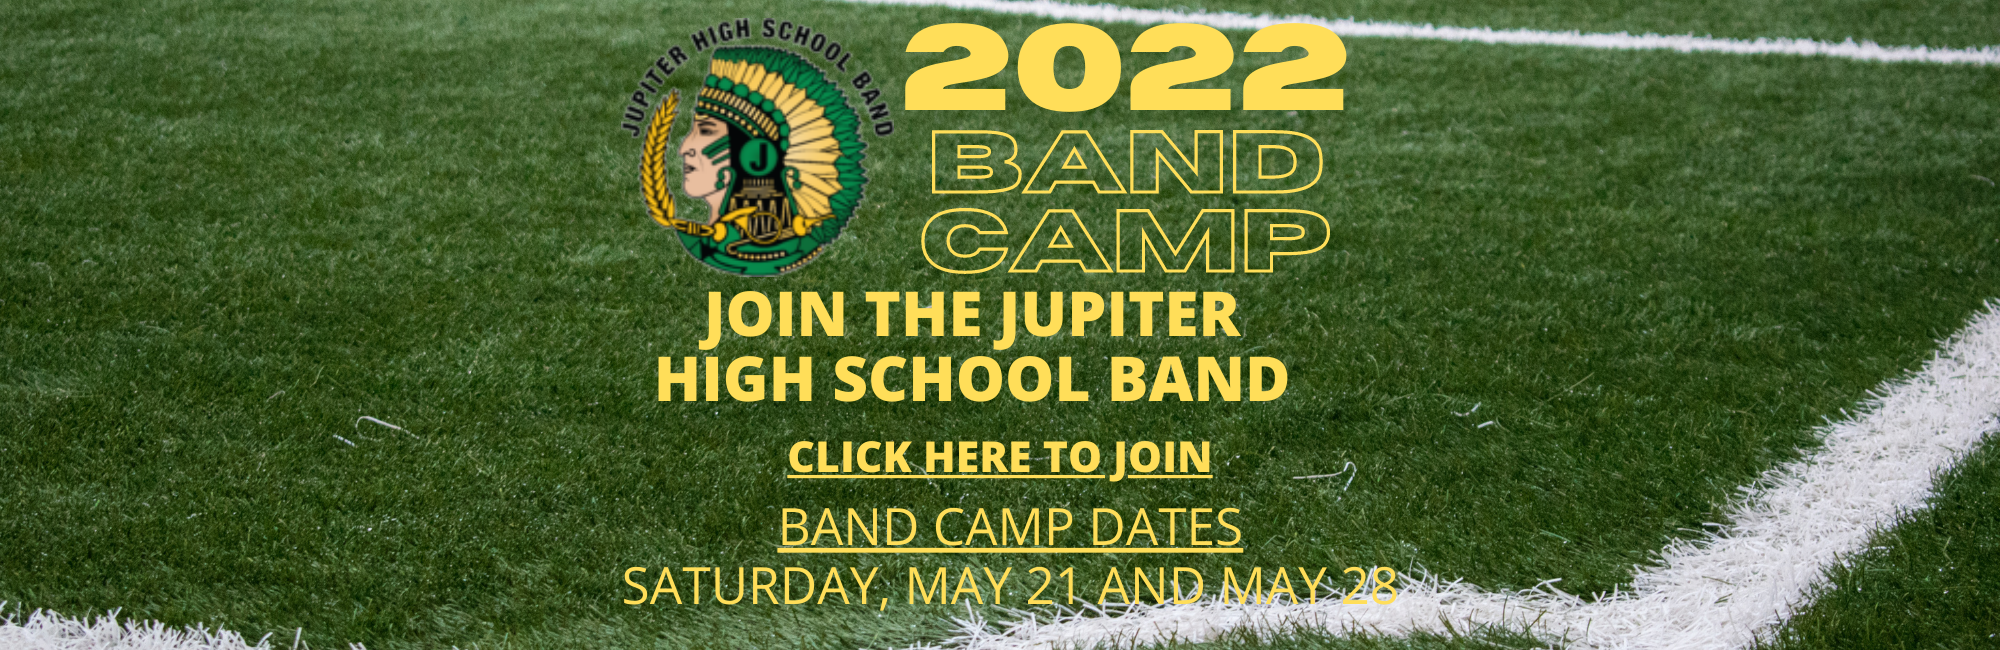 Band Camp Flyer Website (1400 × 400 px) (2000 × 400 px) (2000 × 650 px) (1)